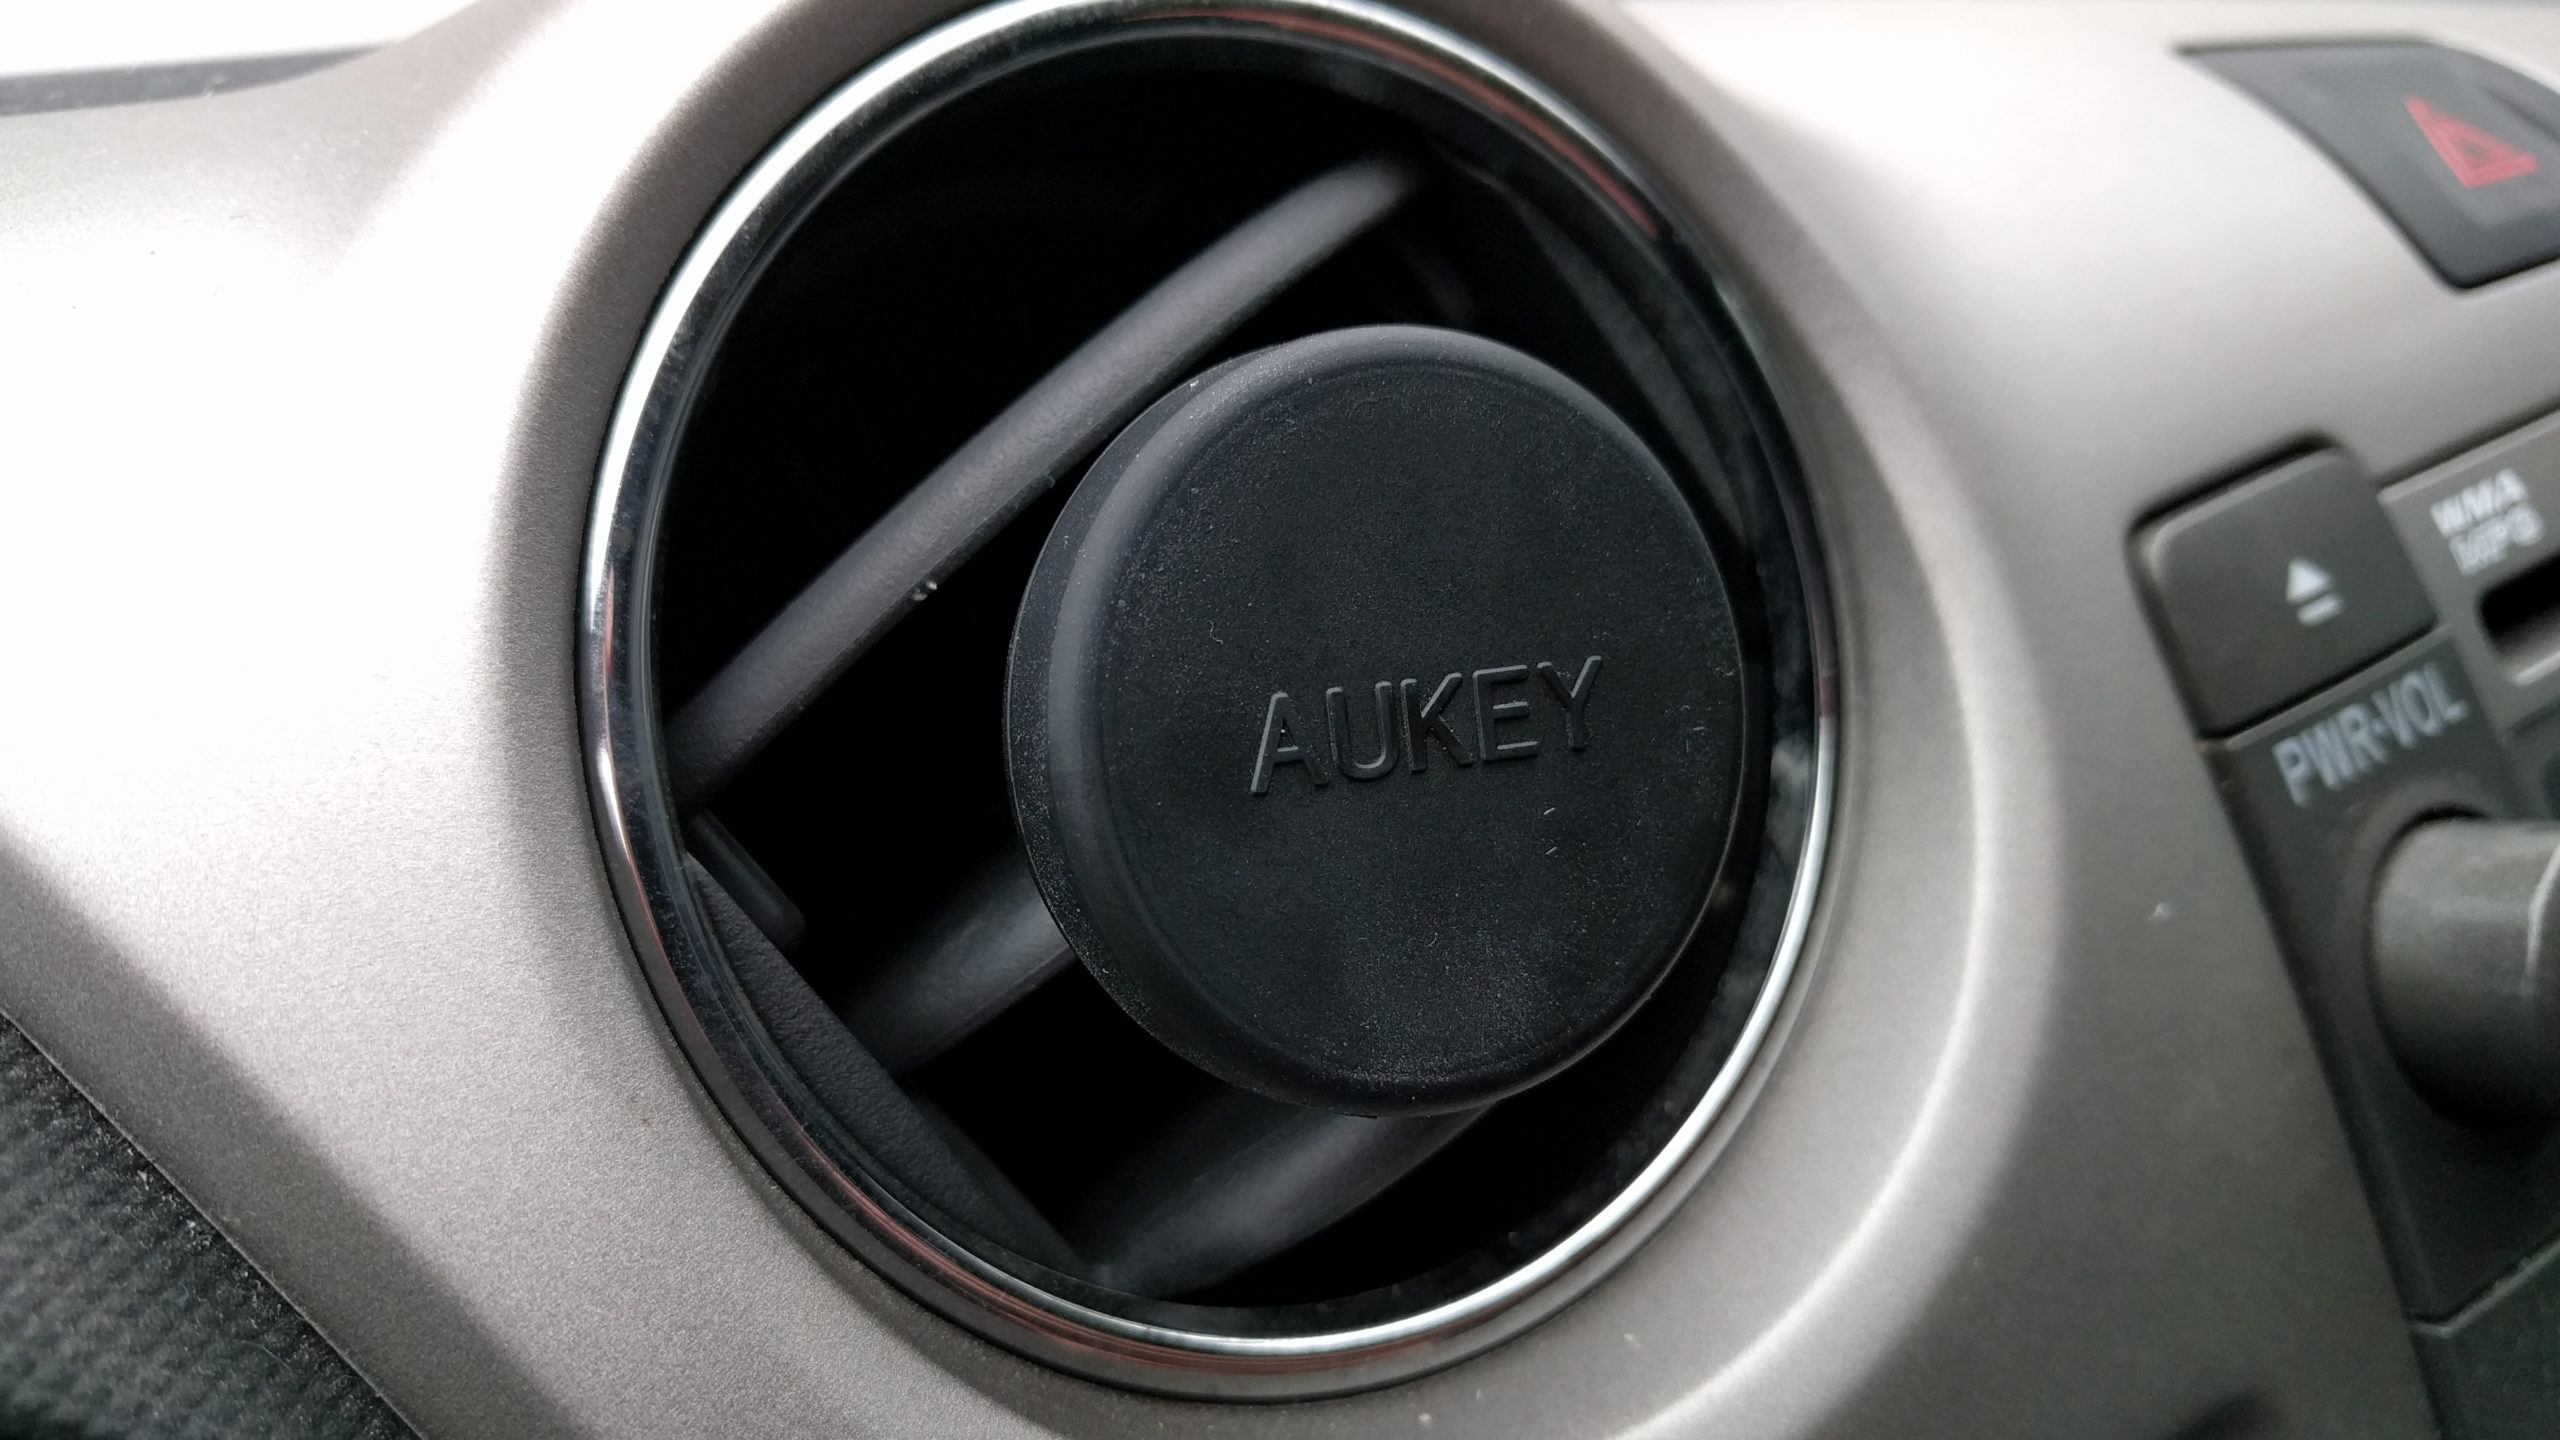 Aukey Magnetic Car Mount Review: A Dead Simple Mount For Any Car